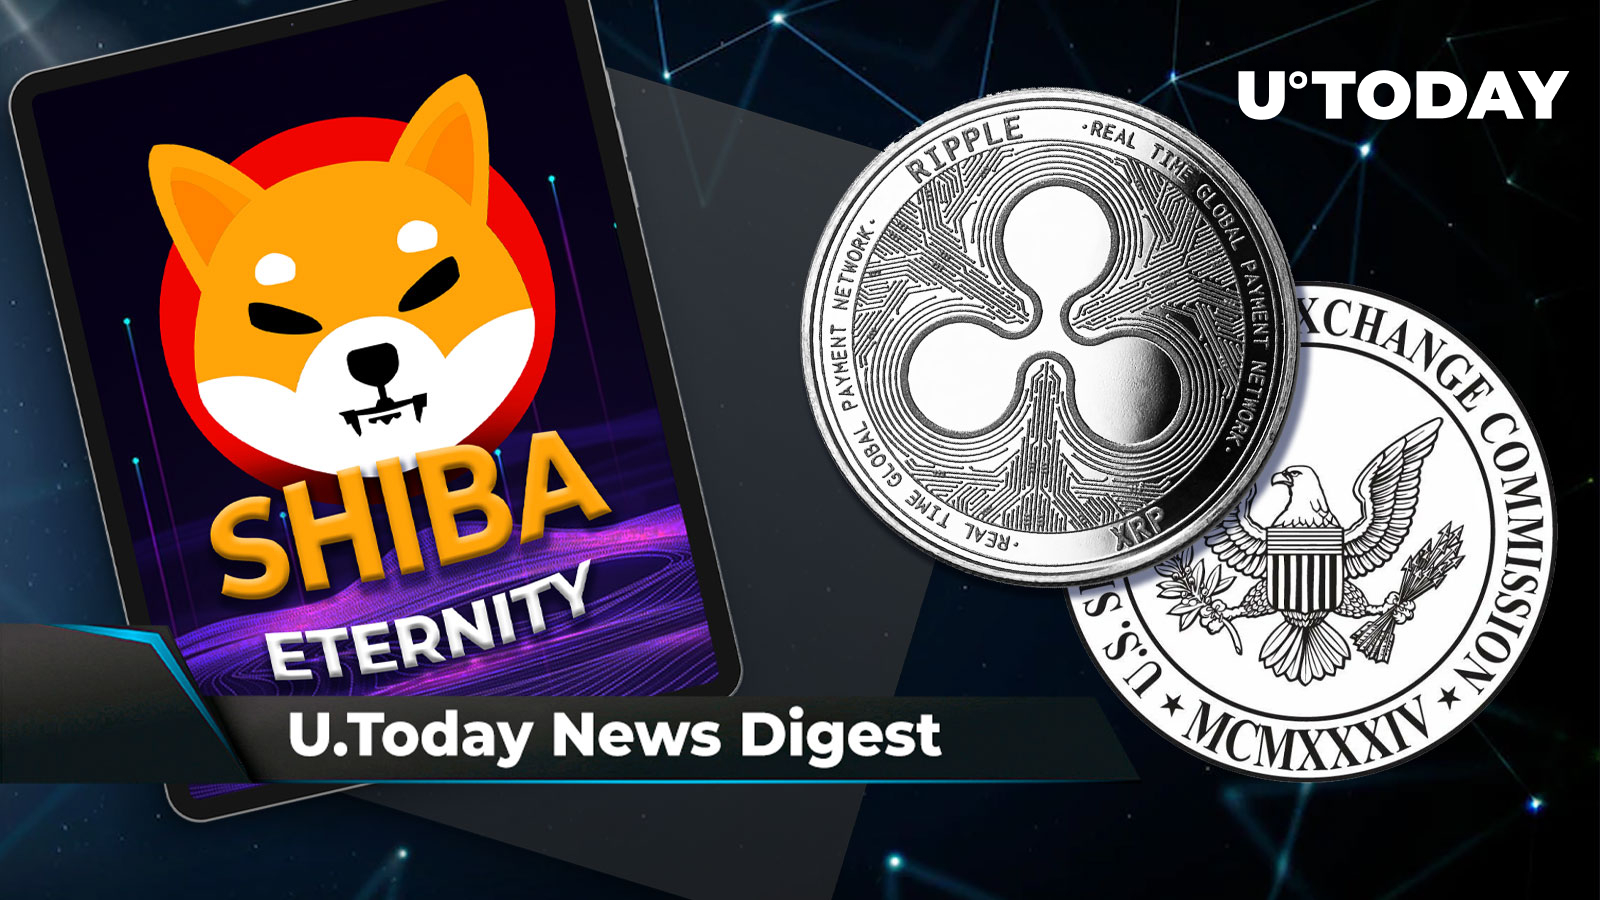 ripple-slams-sec-for-opposing-two-firms-amicus-briefs-swift-to-undergo-massive-upgrade-shiba-eternity-now-live-worldwide-crypto-news-digest-by-u-today